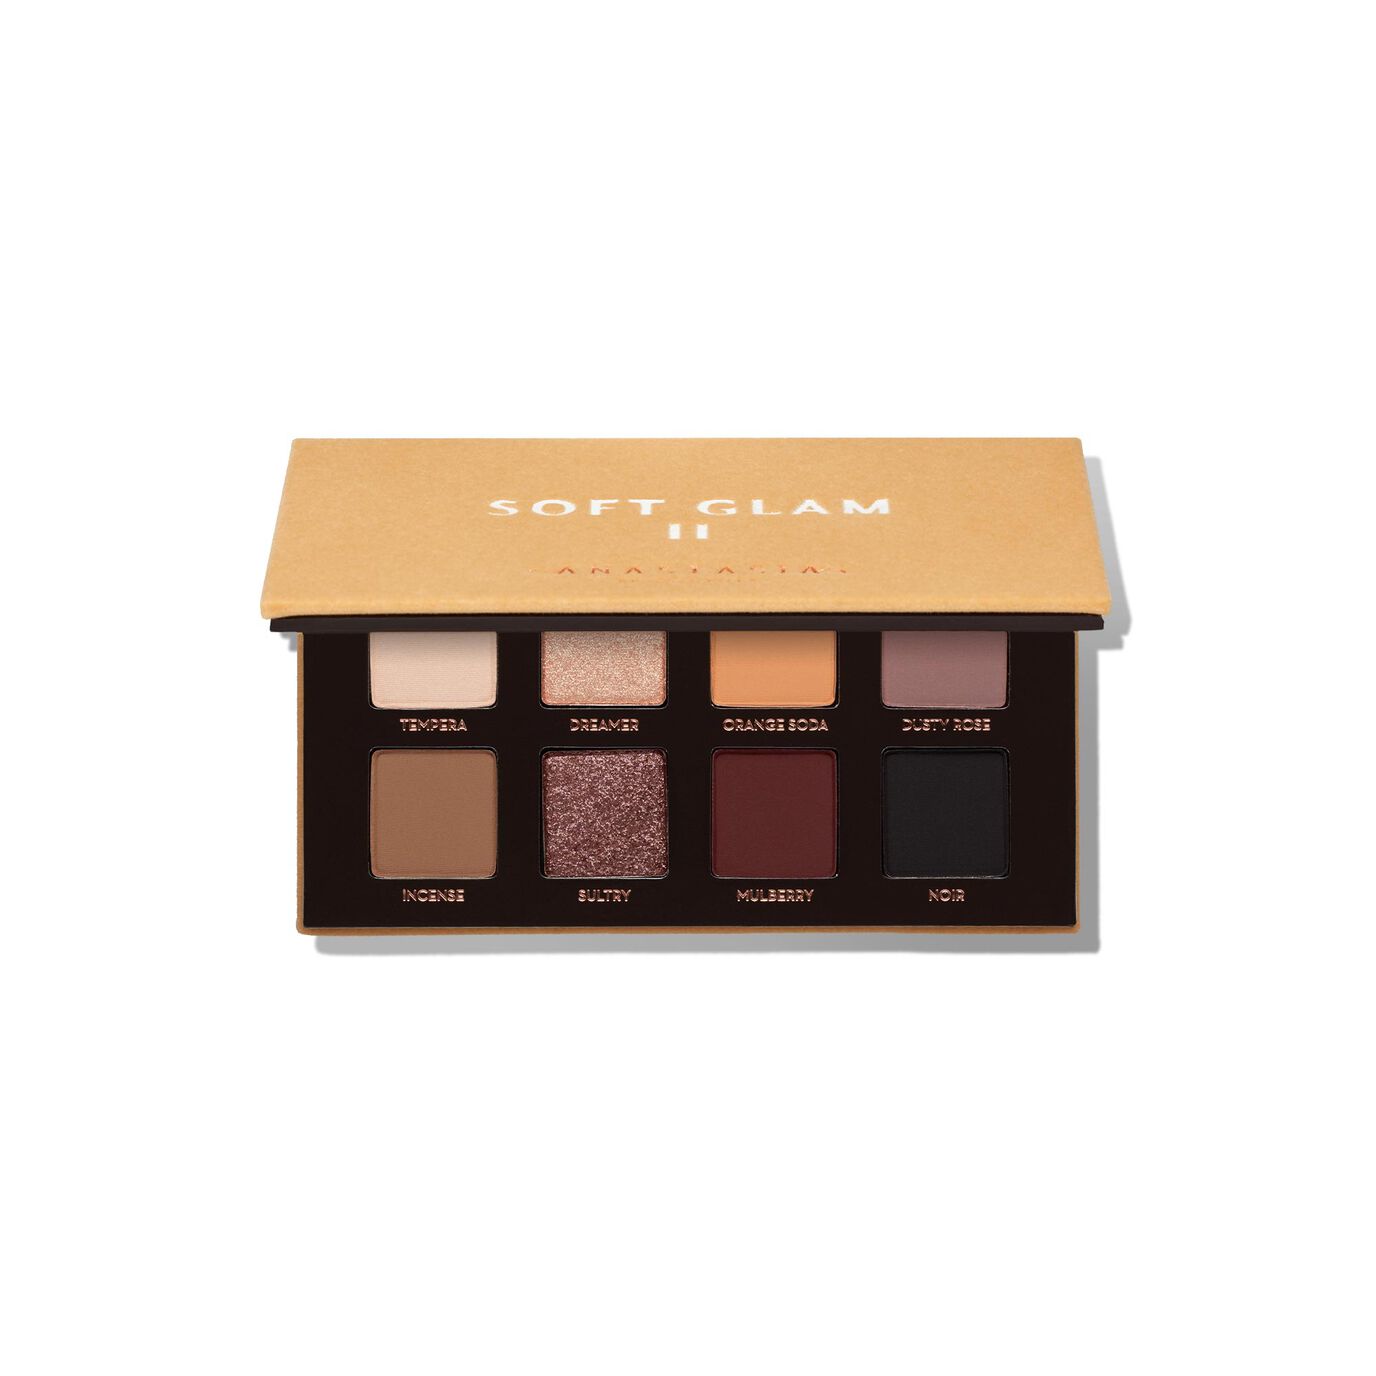 Shop The Latest Collection Of Anastasia Beverly Hills Mini Soft Glam In Lebanon